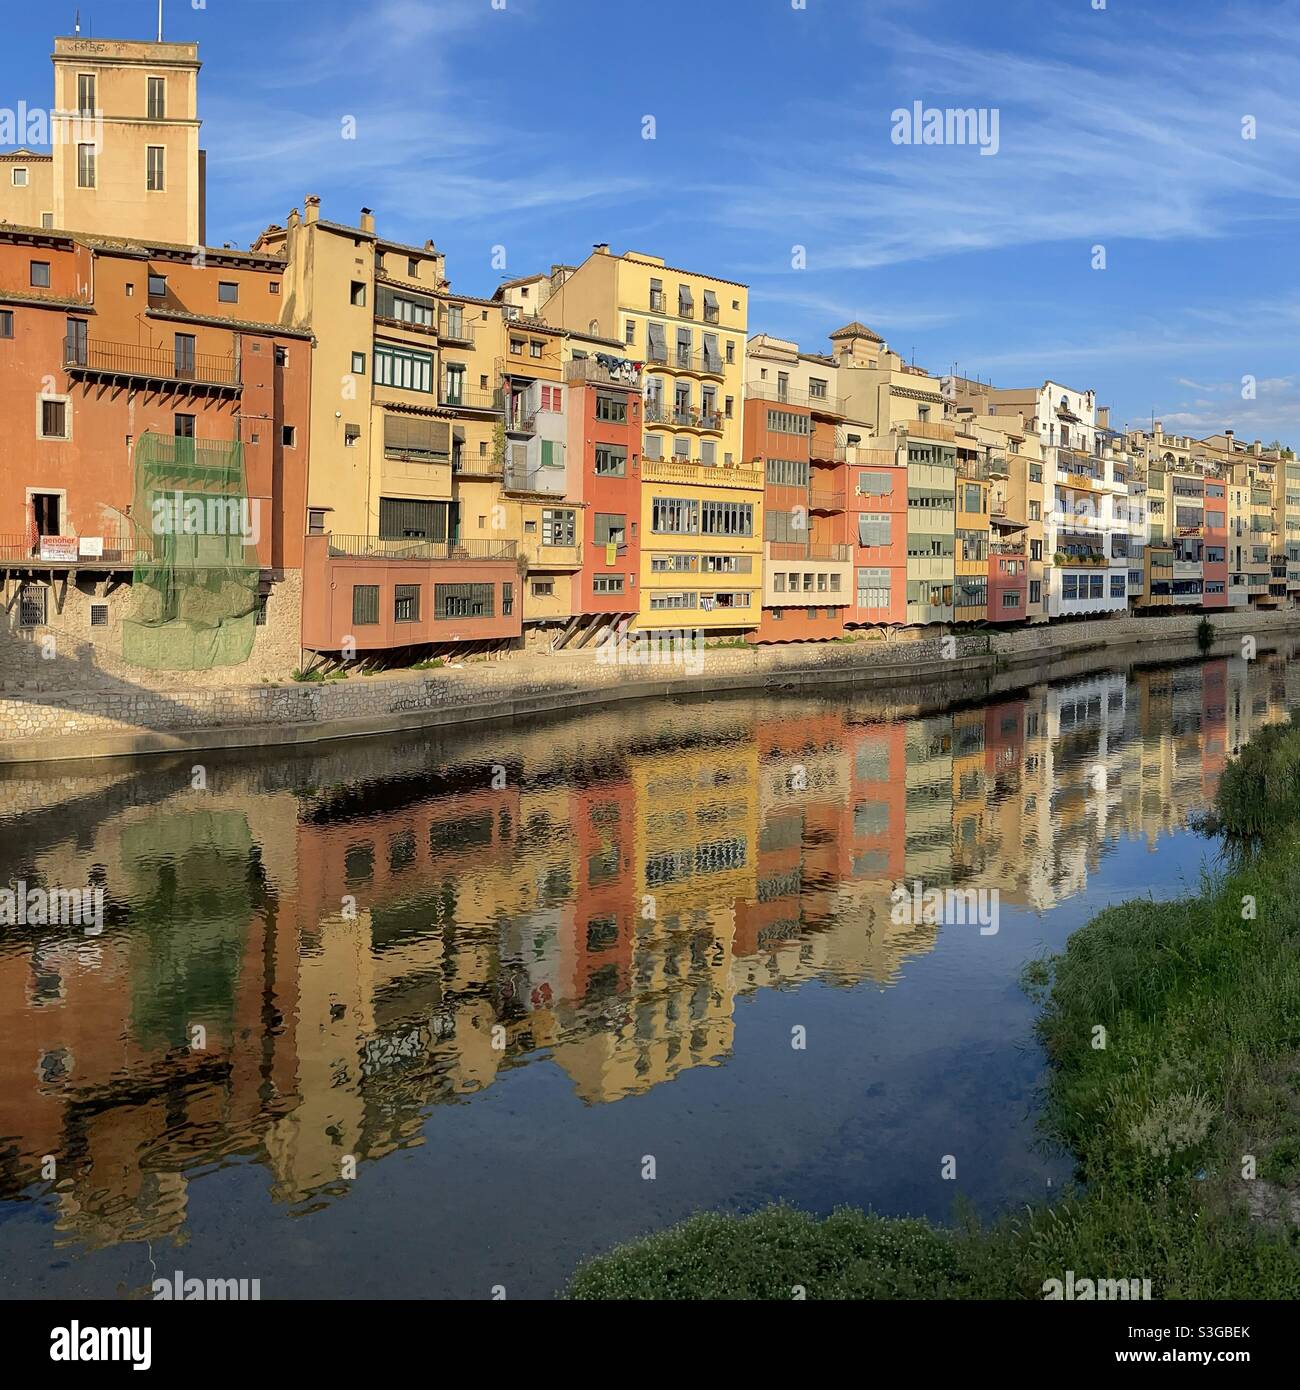 Reflections of buildings in the River Onyar, Girona, Cataluña, Spain. Stock Photo